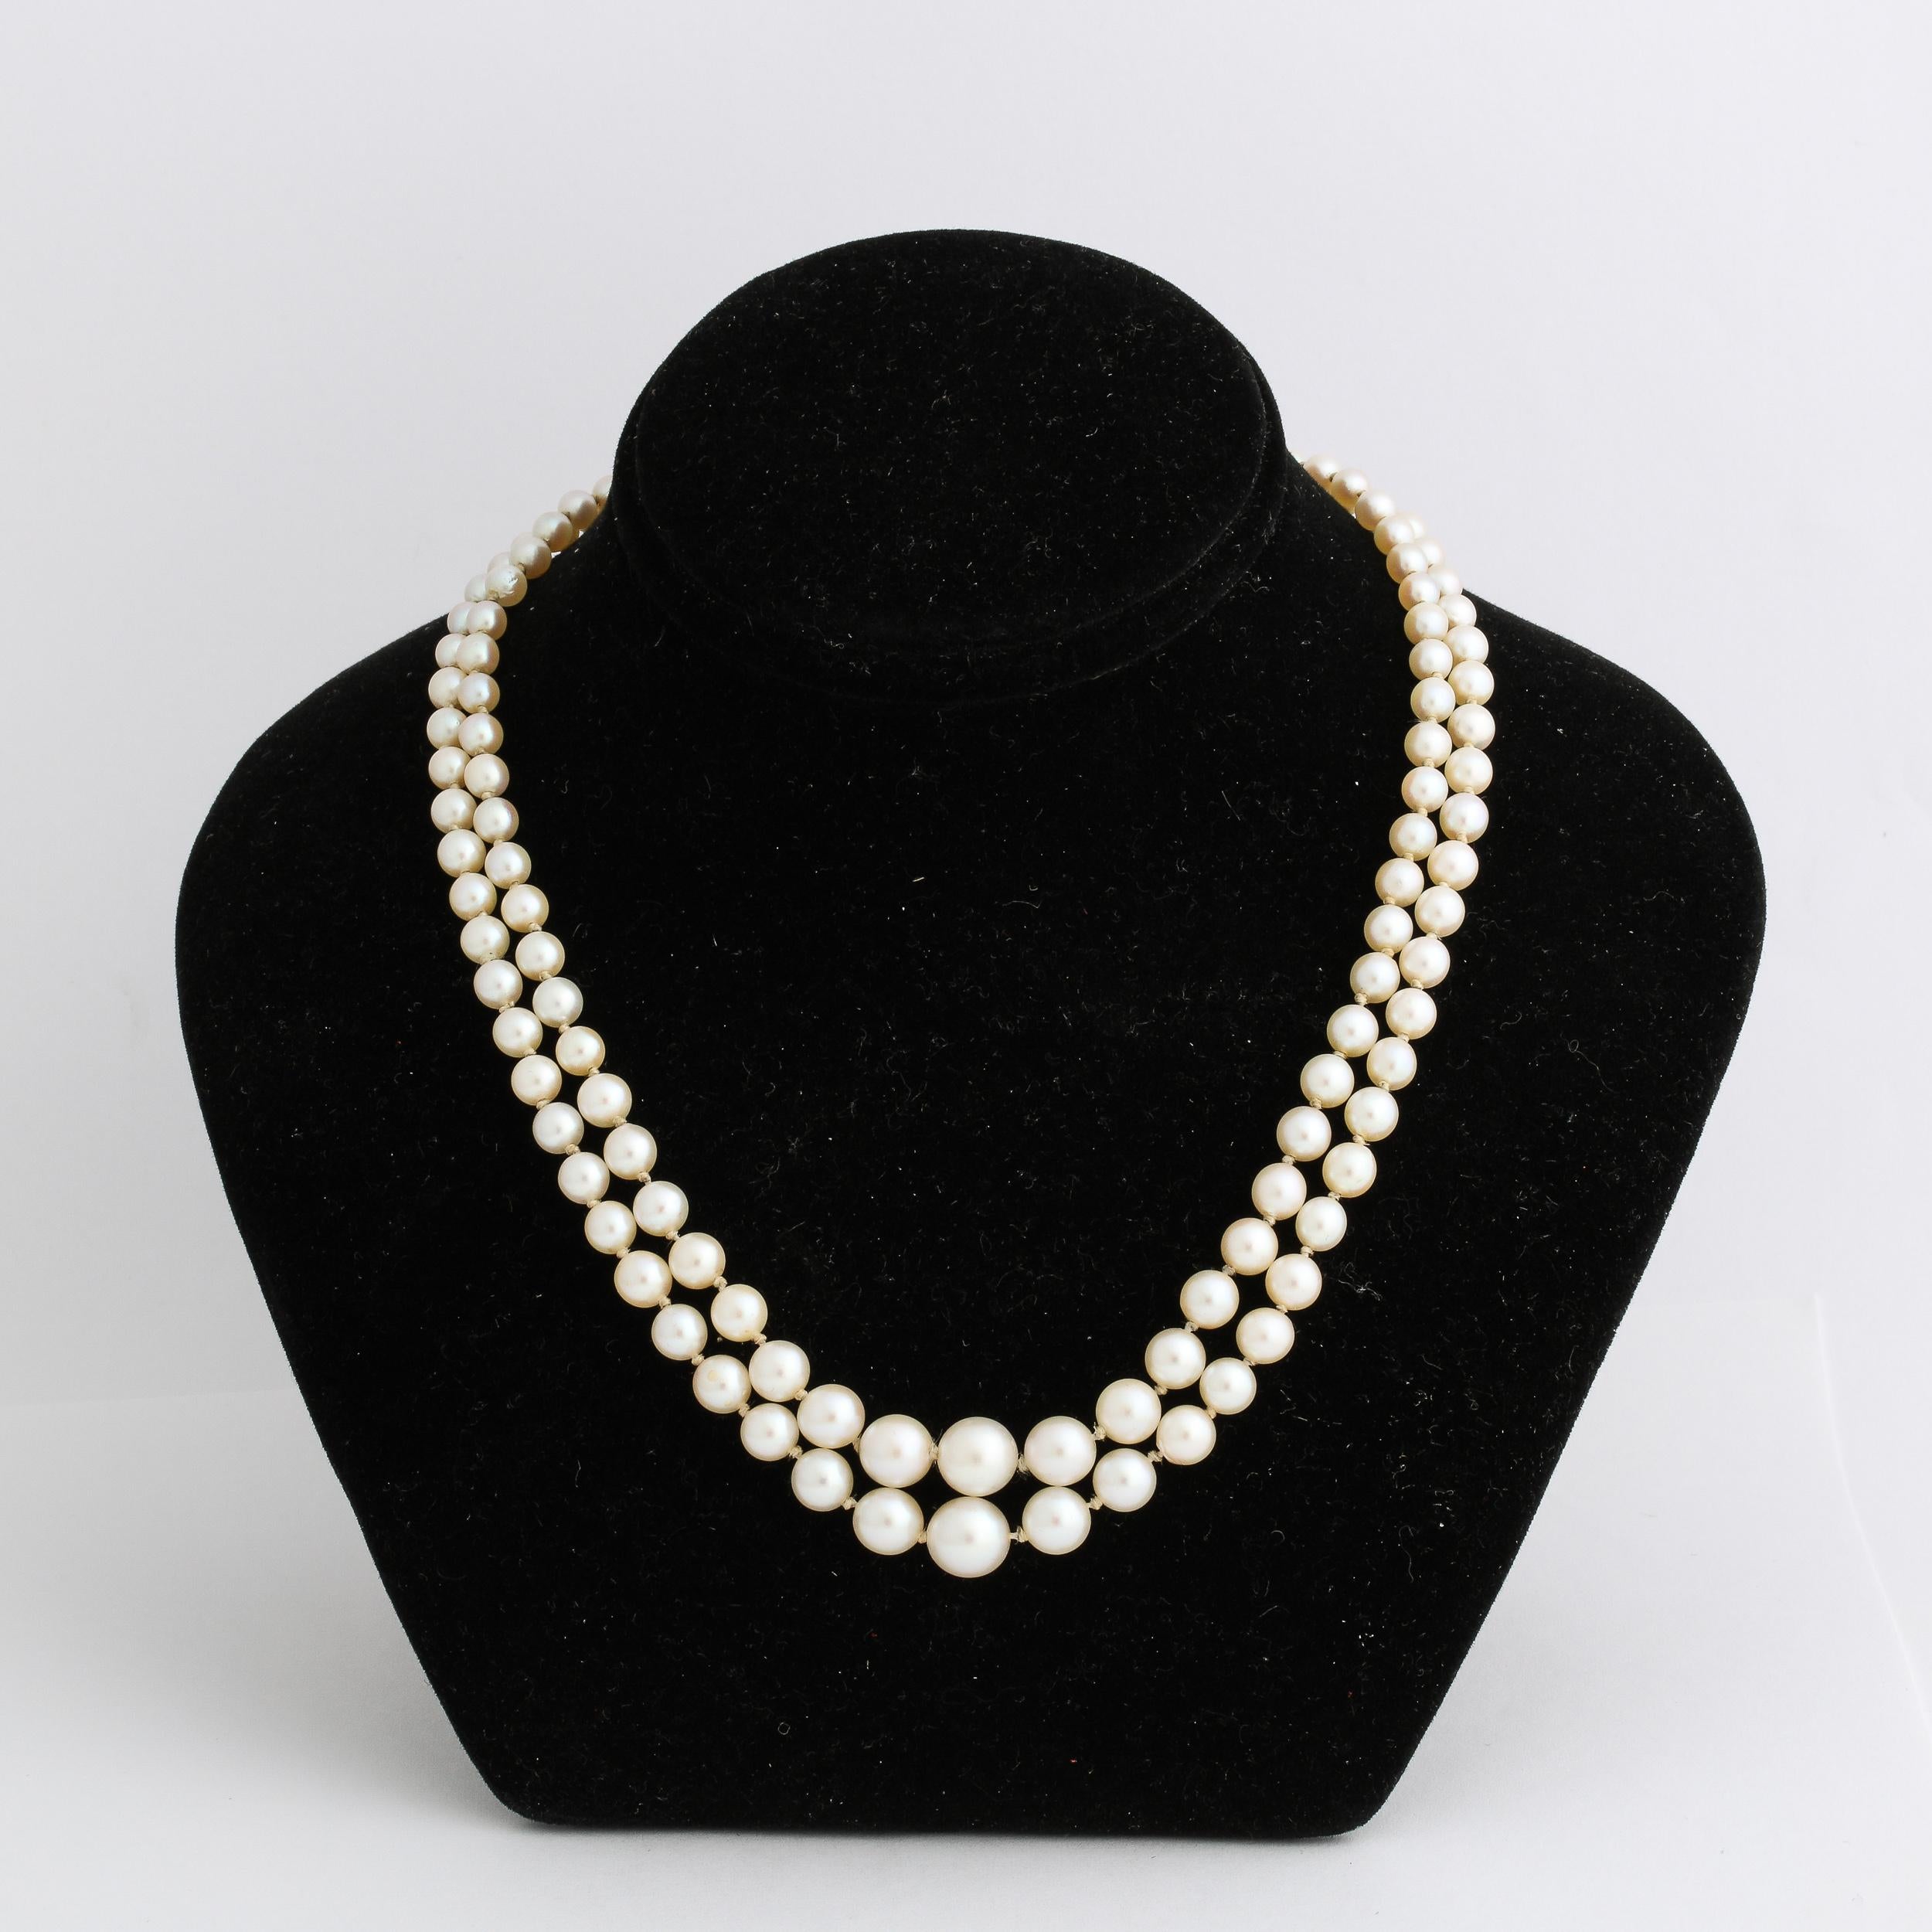 This classic and elegant double strand graduated pearl necklace with graduated pearls from 4.0 to 7.6 mm is also set with a white gold 14k and pearl clasp. Timeless elegance and so perfect also for a bride. Excellent Vintage condition .
Length 15